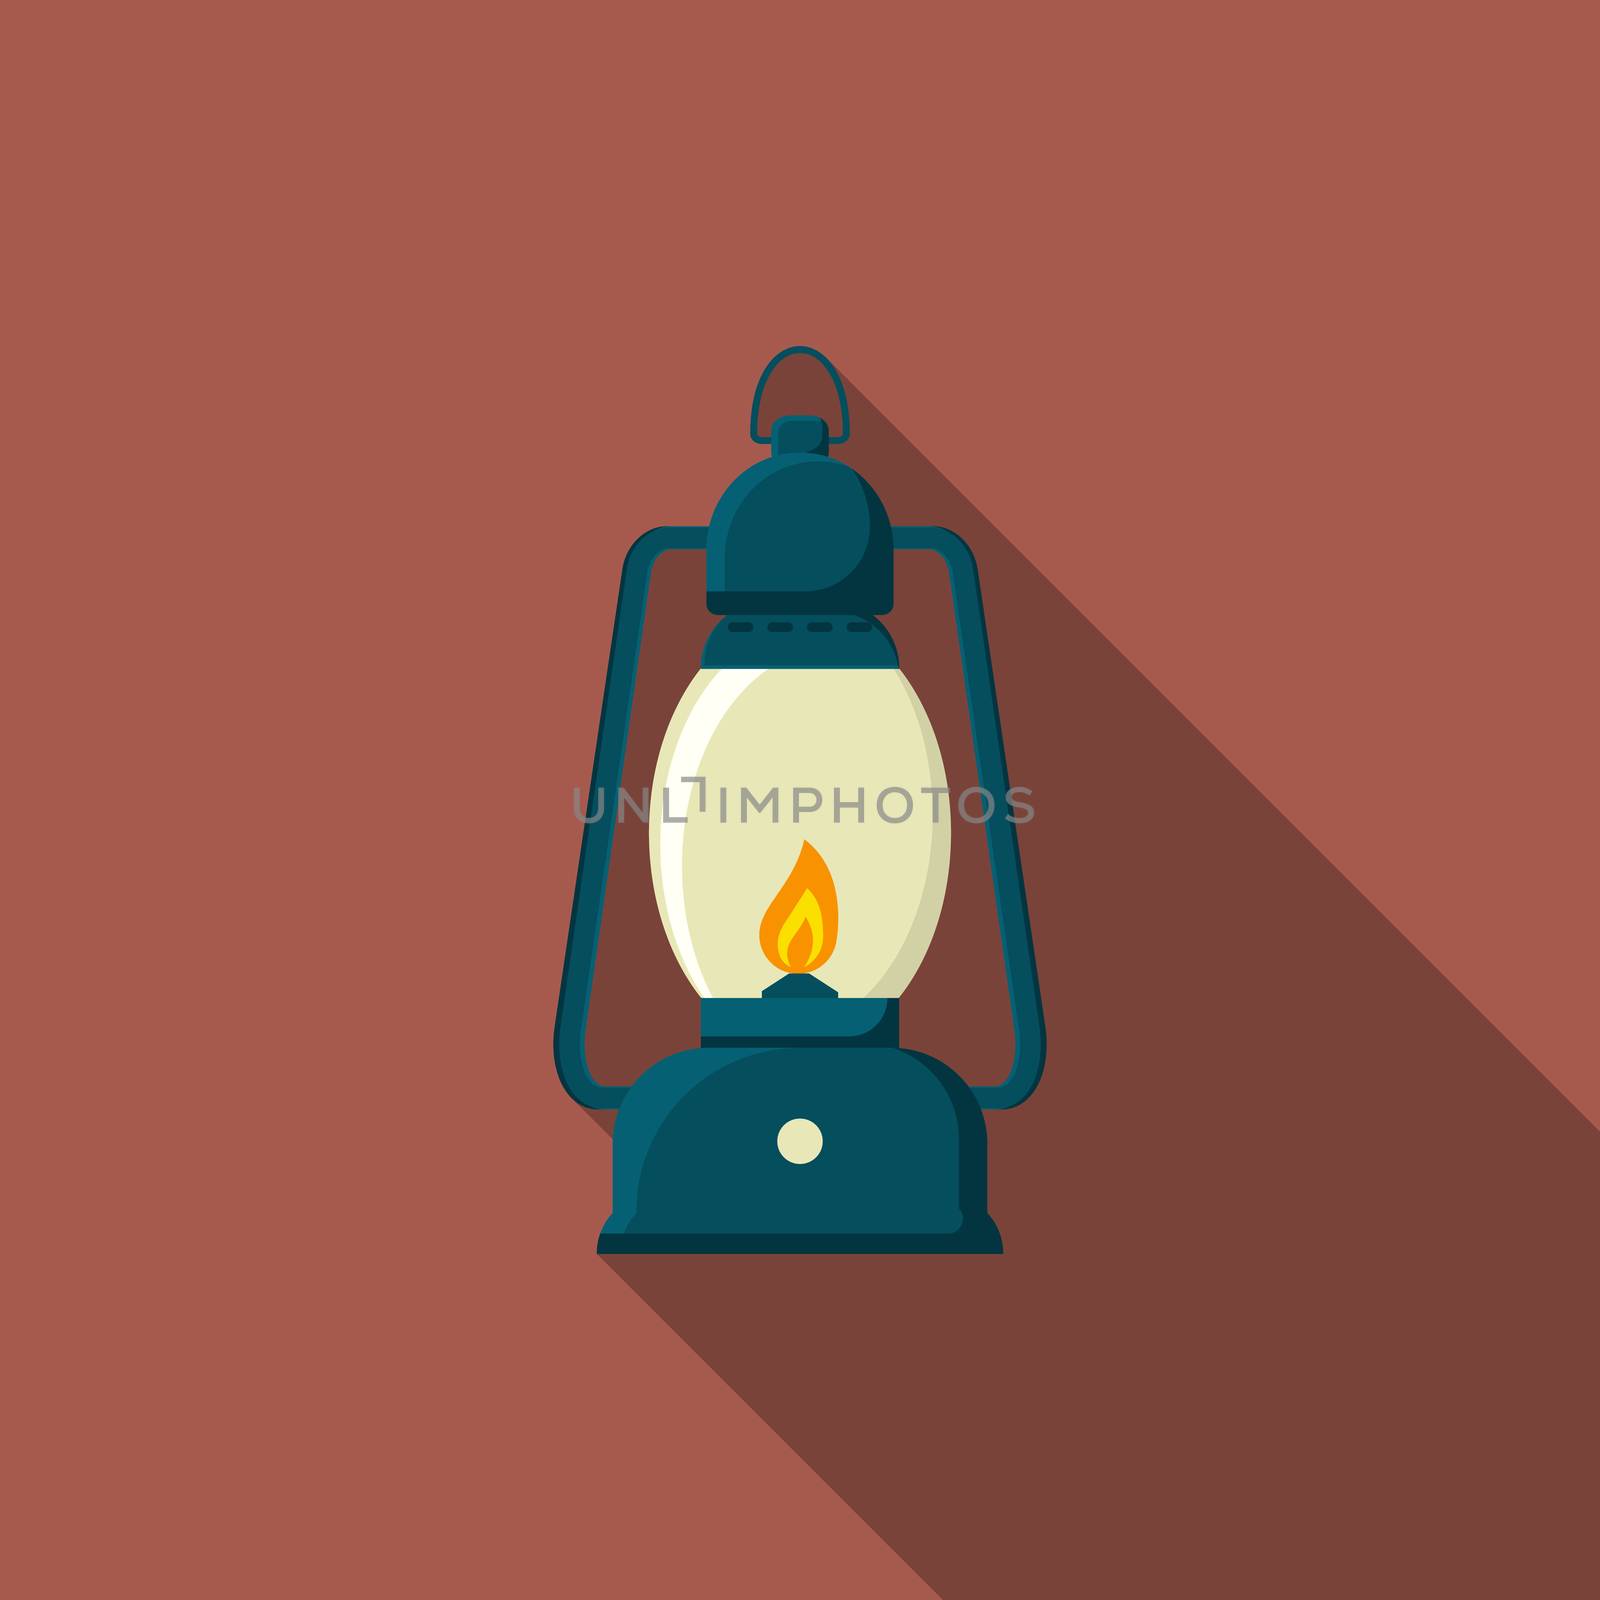 Flat design modern vector illustration of lantern icon, camping and hiking equipment with long shadow.